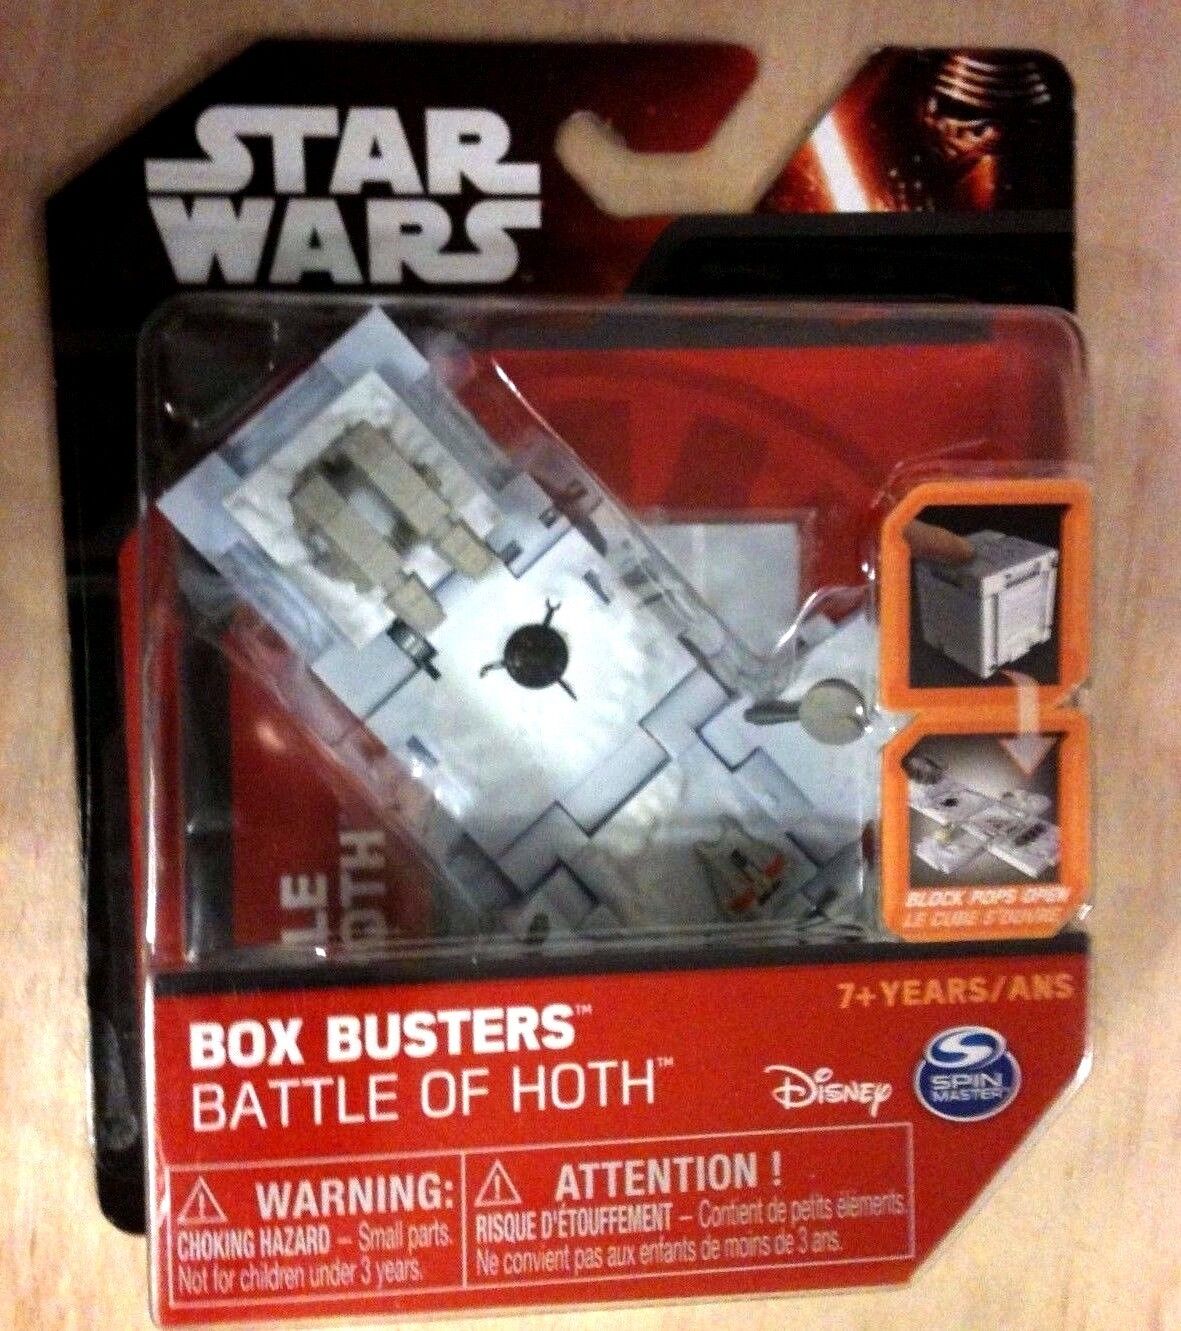 STAR WARS BOX BUSTERS BATTLE OF HOTH FACTORY SEALED GREAT CONDITION AUTHENTIC 